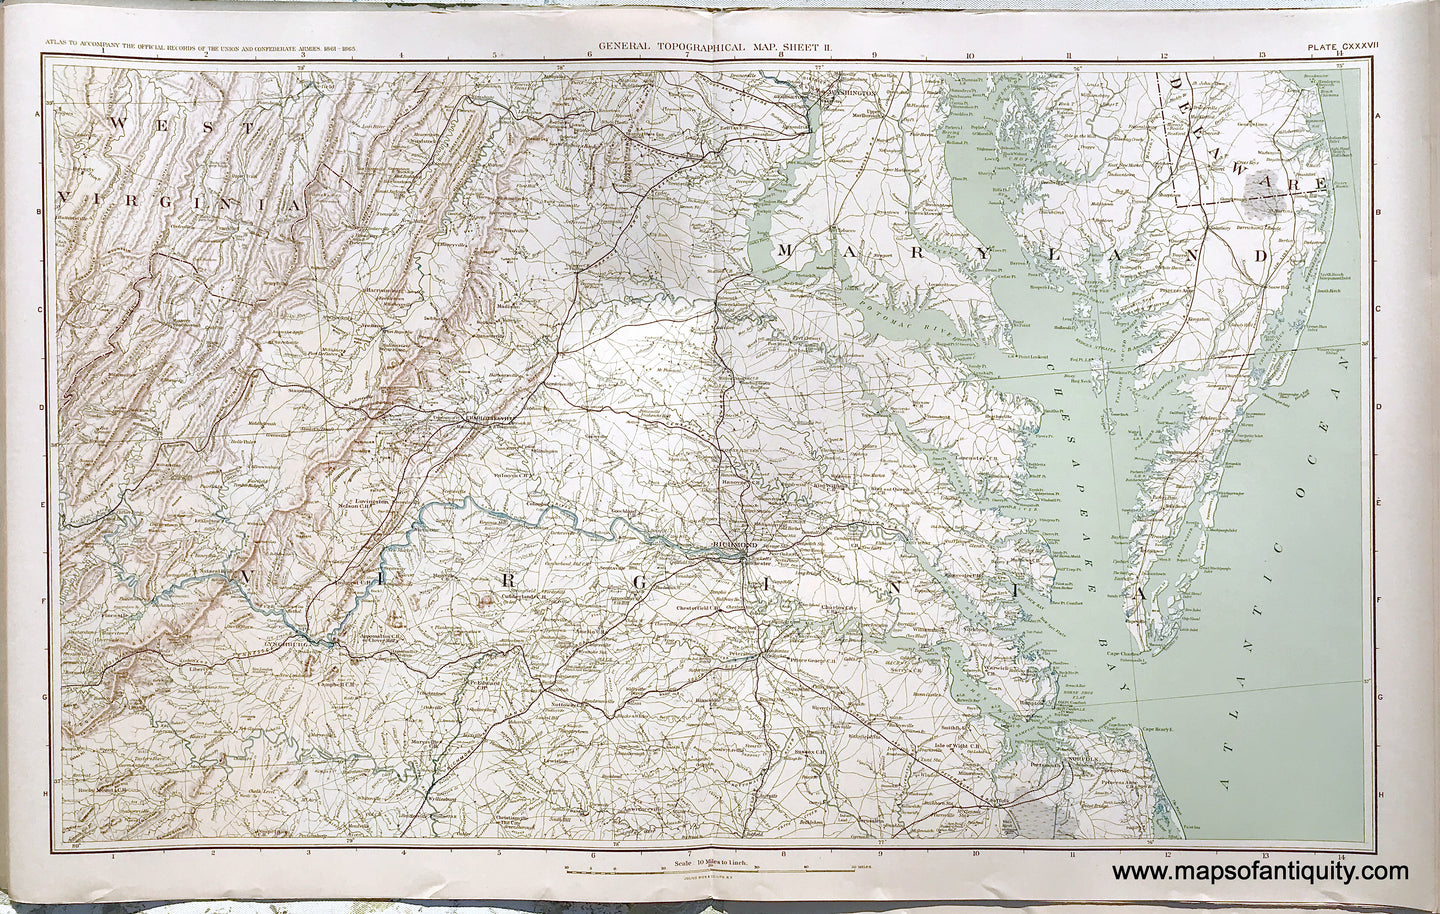 Antique-Lithograph-Print-Plate-137.-General-Topographical-Map.-Sheet-II.-Sections-of-West-Virginia-Virginia-Maryland-and-Delaware.-1894-US-War-Dept.-Civil-War-Civil-War-1800s-19th-century-Maps-of-Antiquity